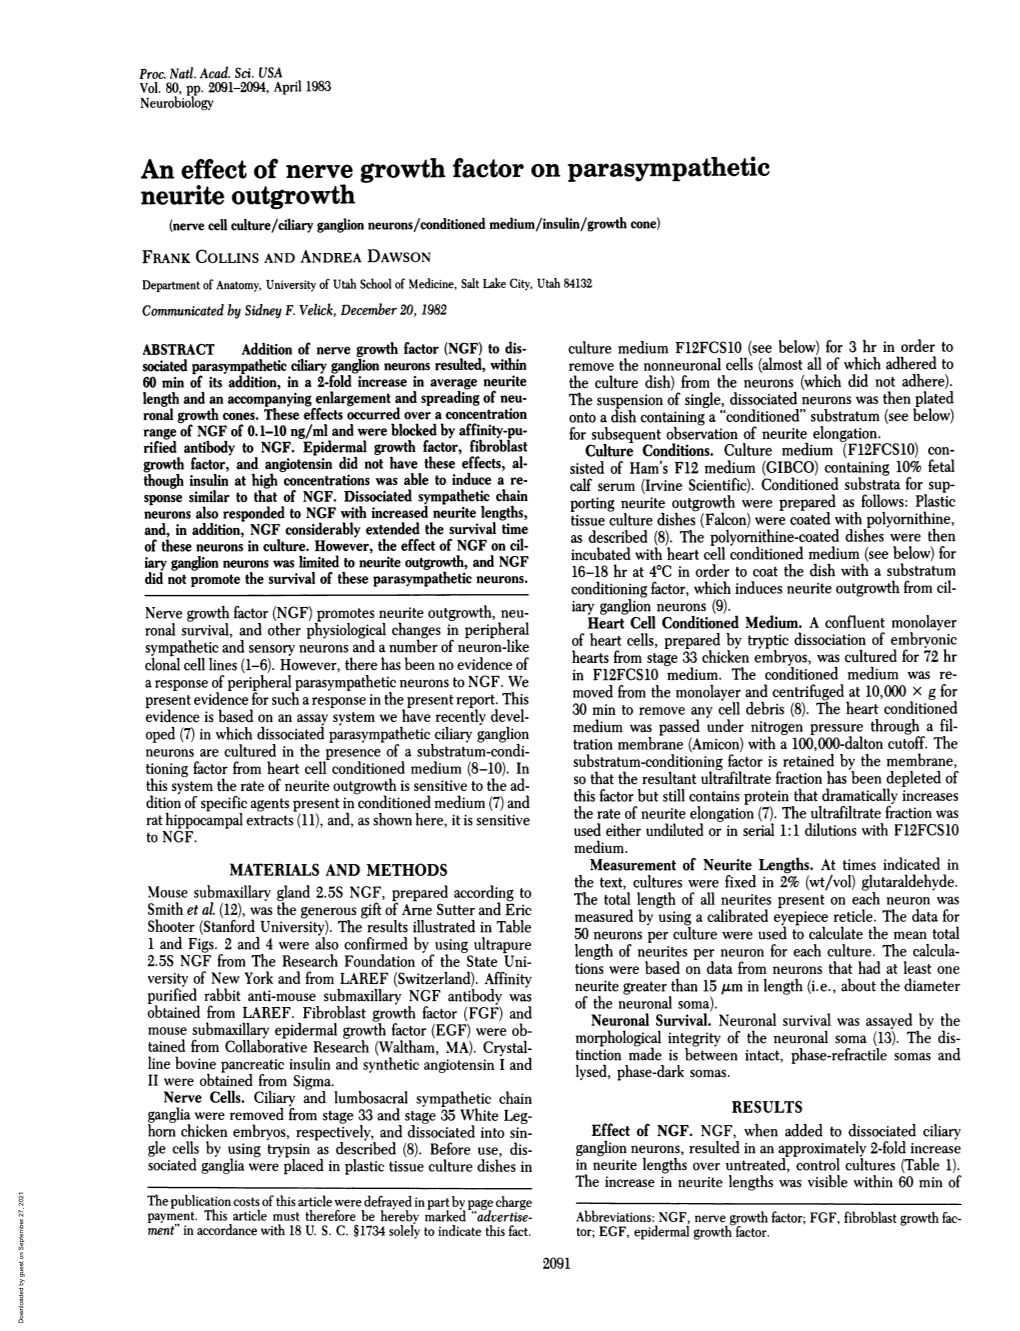 An Effect of Nerve Growth Factor on Parasympathetic Neurite Outgrowth